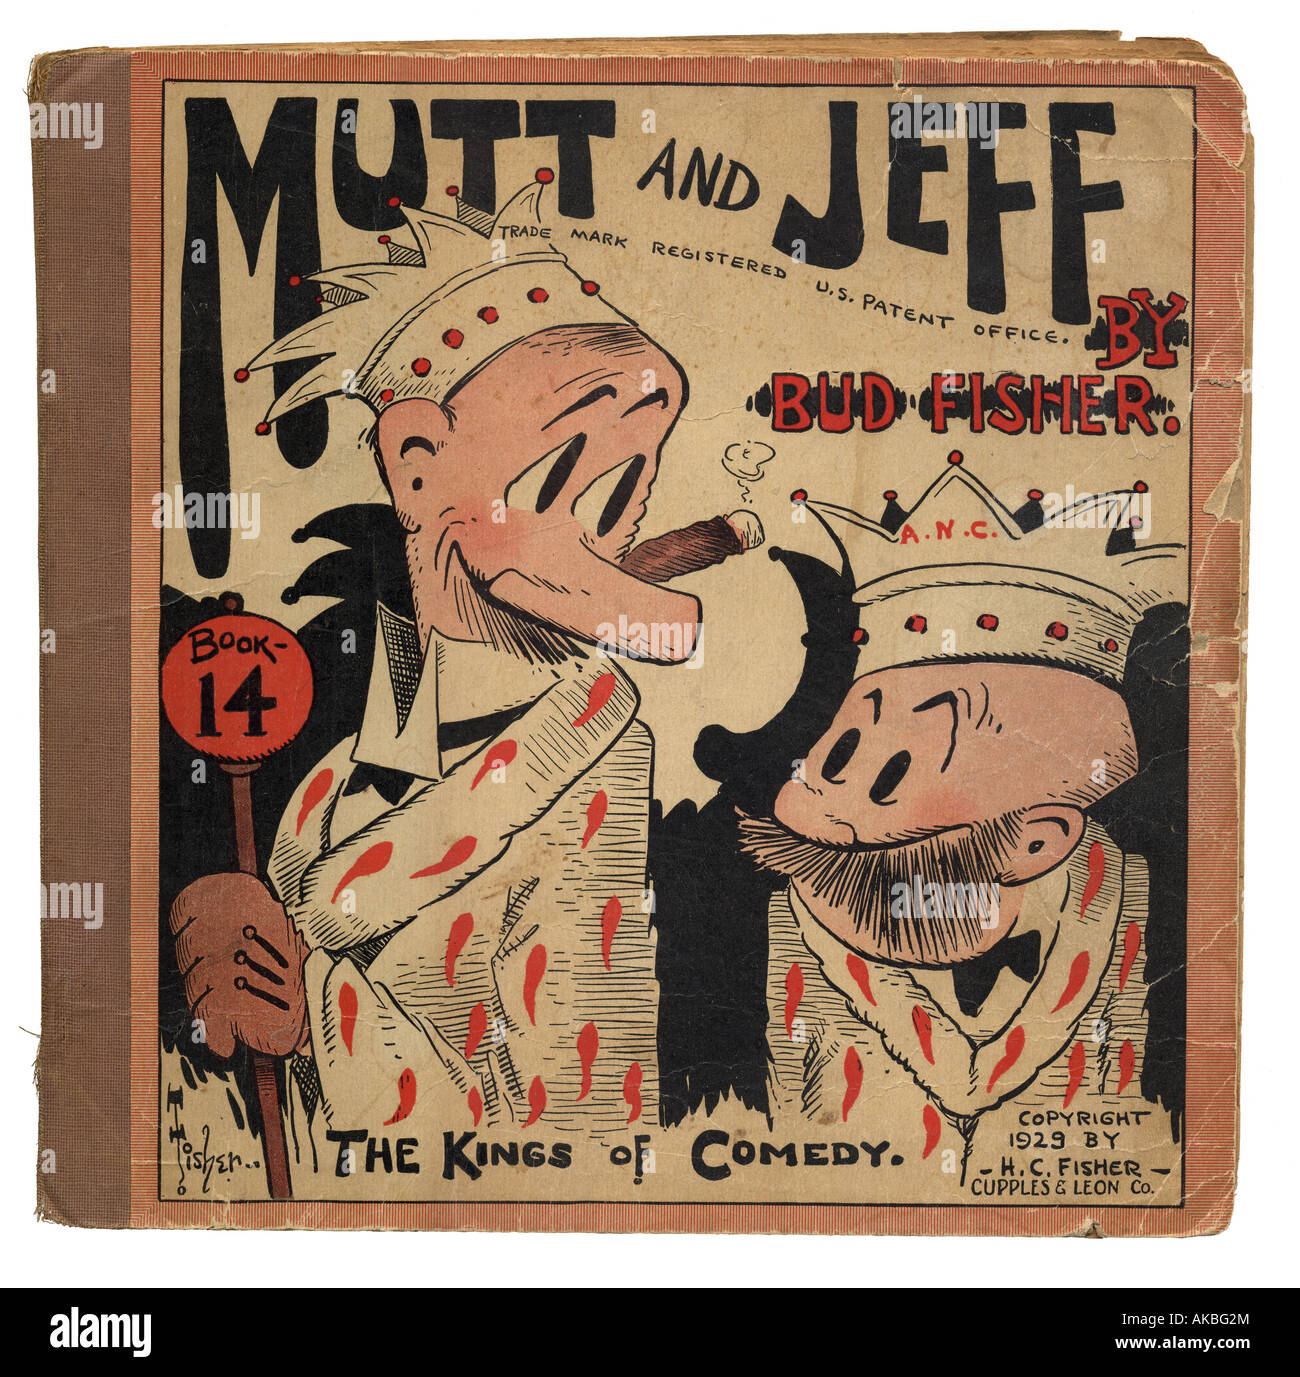 Mutt and Jeff Book 14 by Bud Fisher Stock Photo